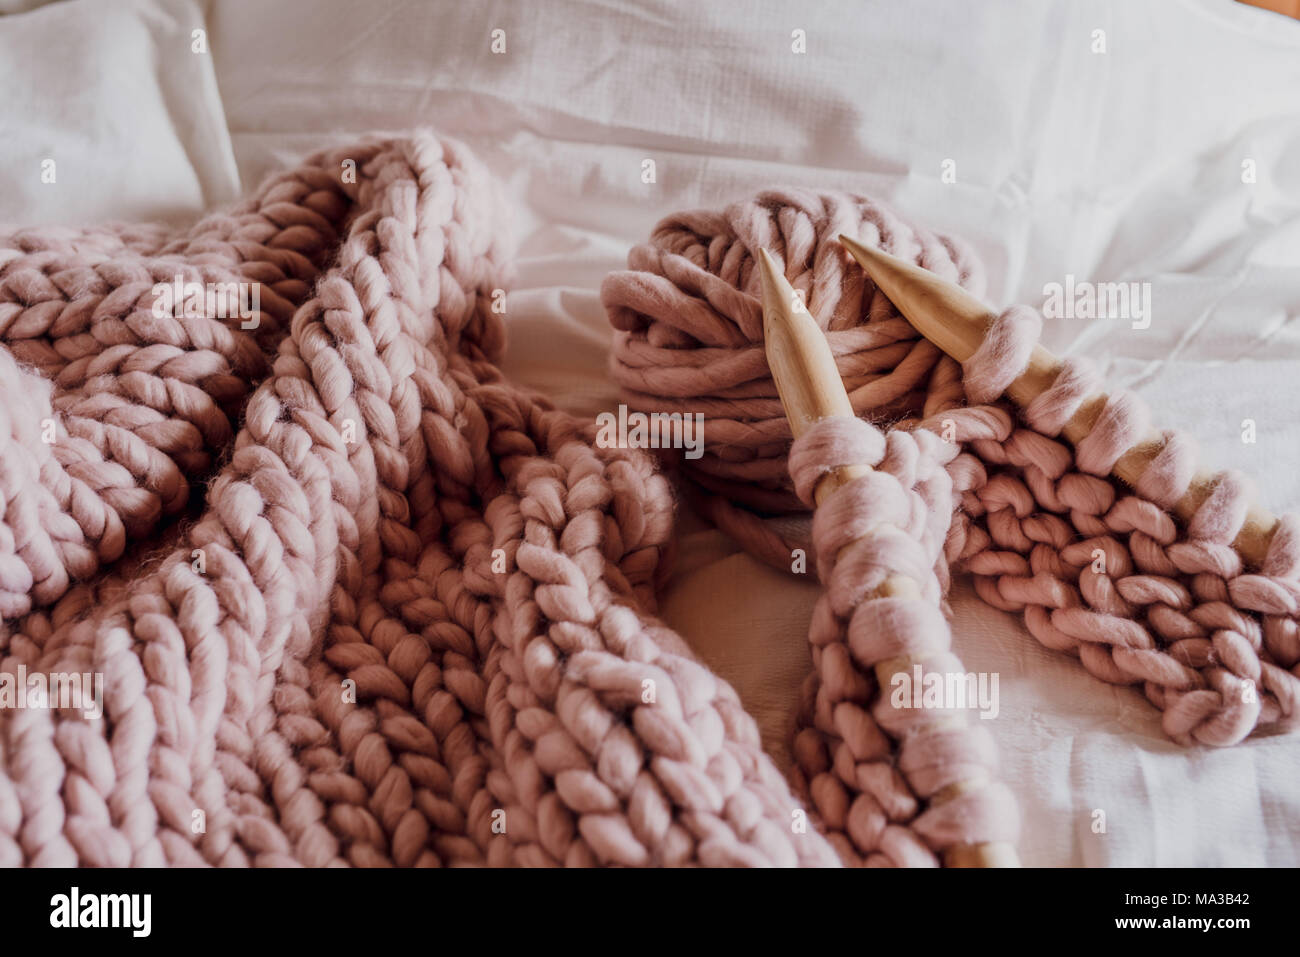 XXL knitting things in pink Stock Photo